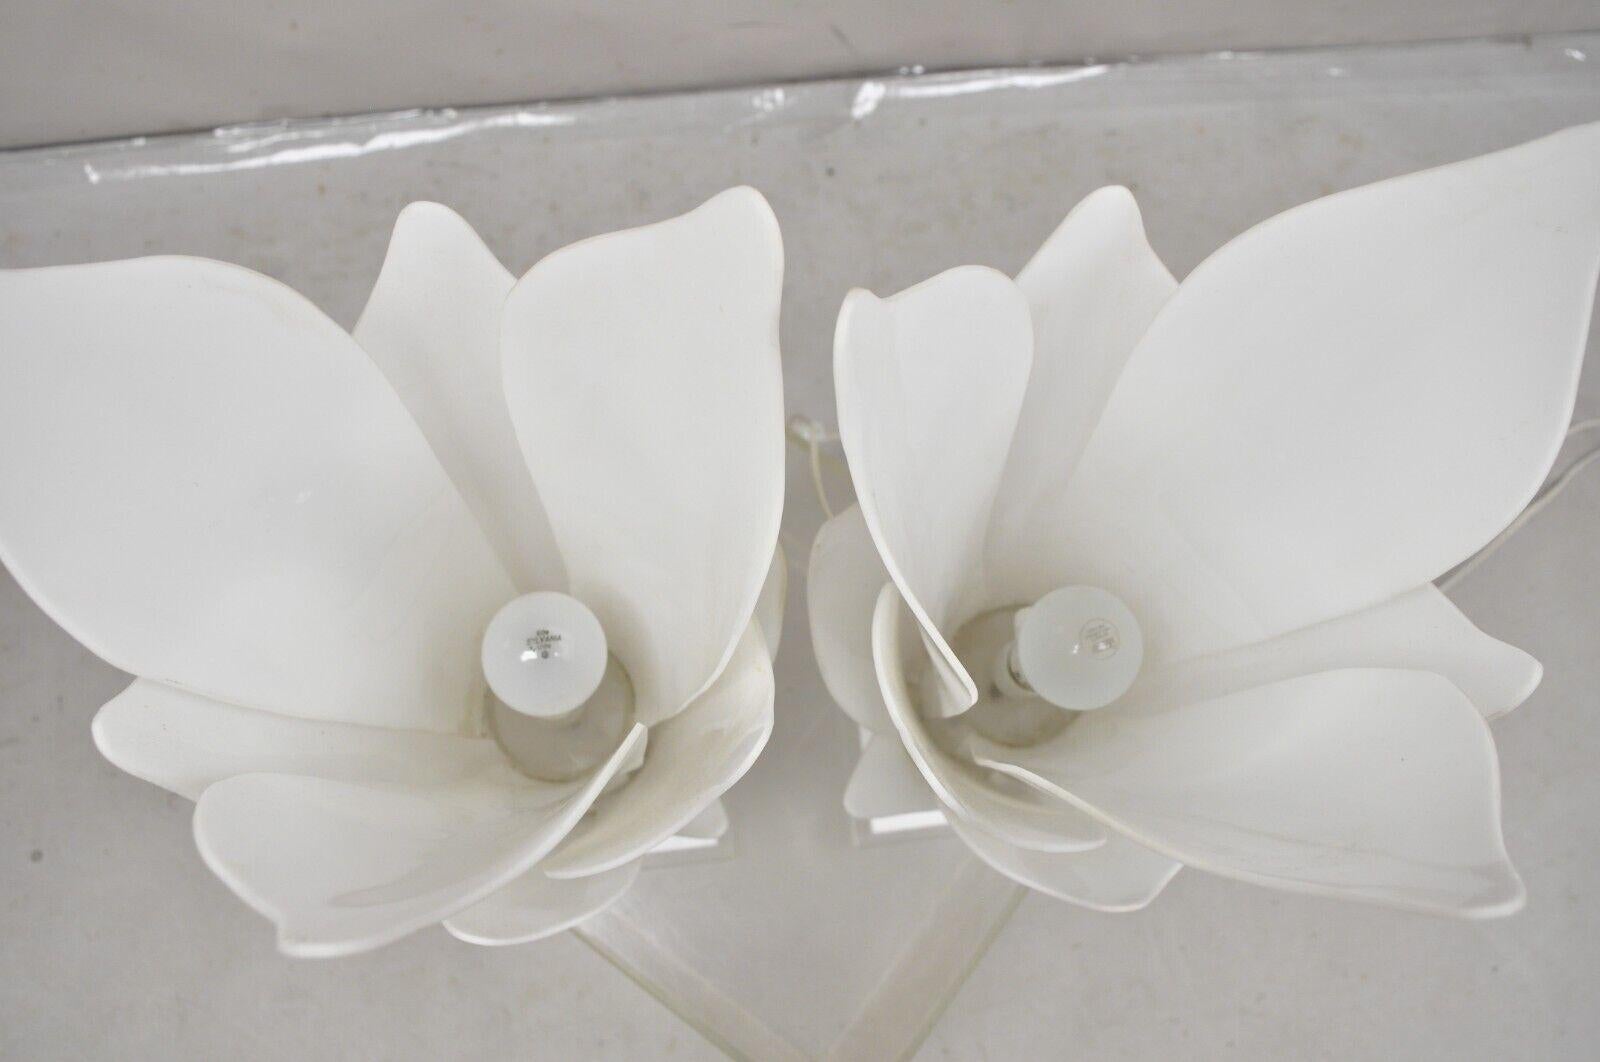 Rougier White Acrylic Lucite Tulip Flower Leaf Mid Century Table Lamps - a Pair For Sale 3